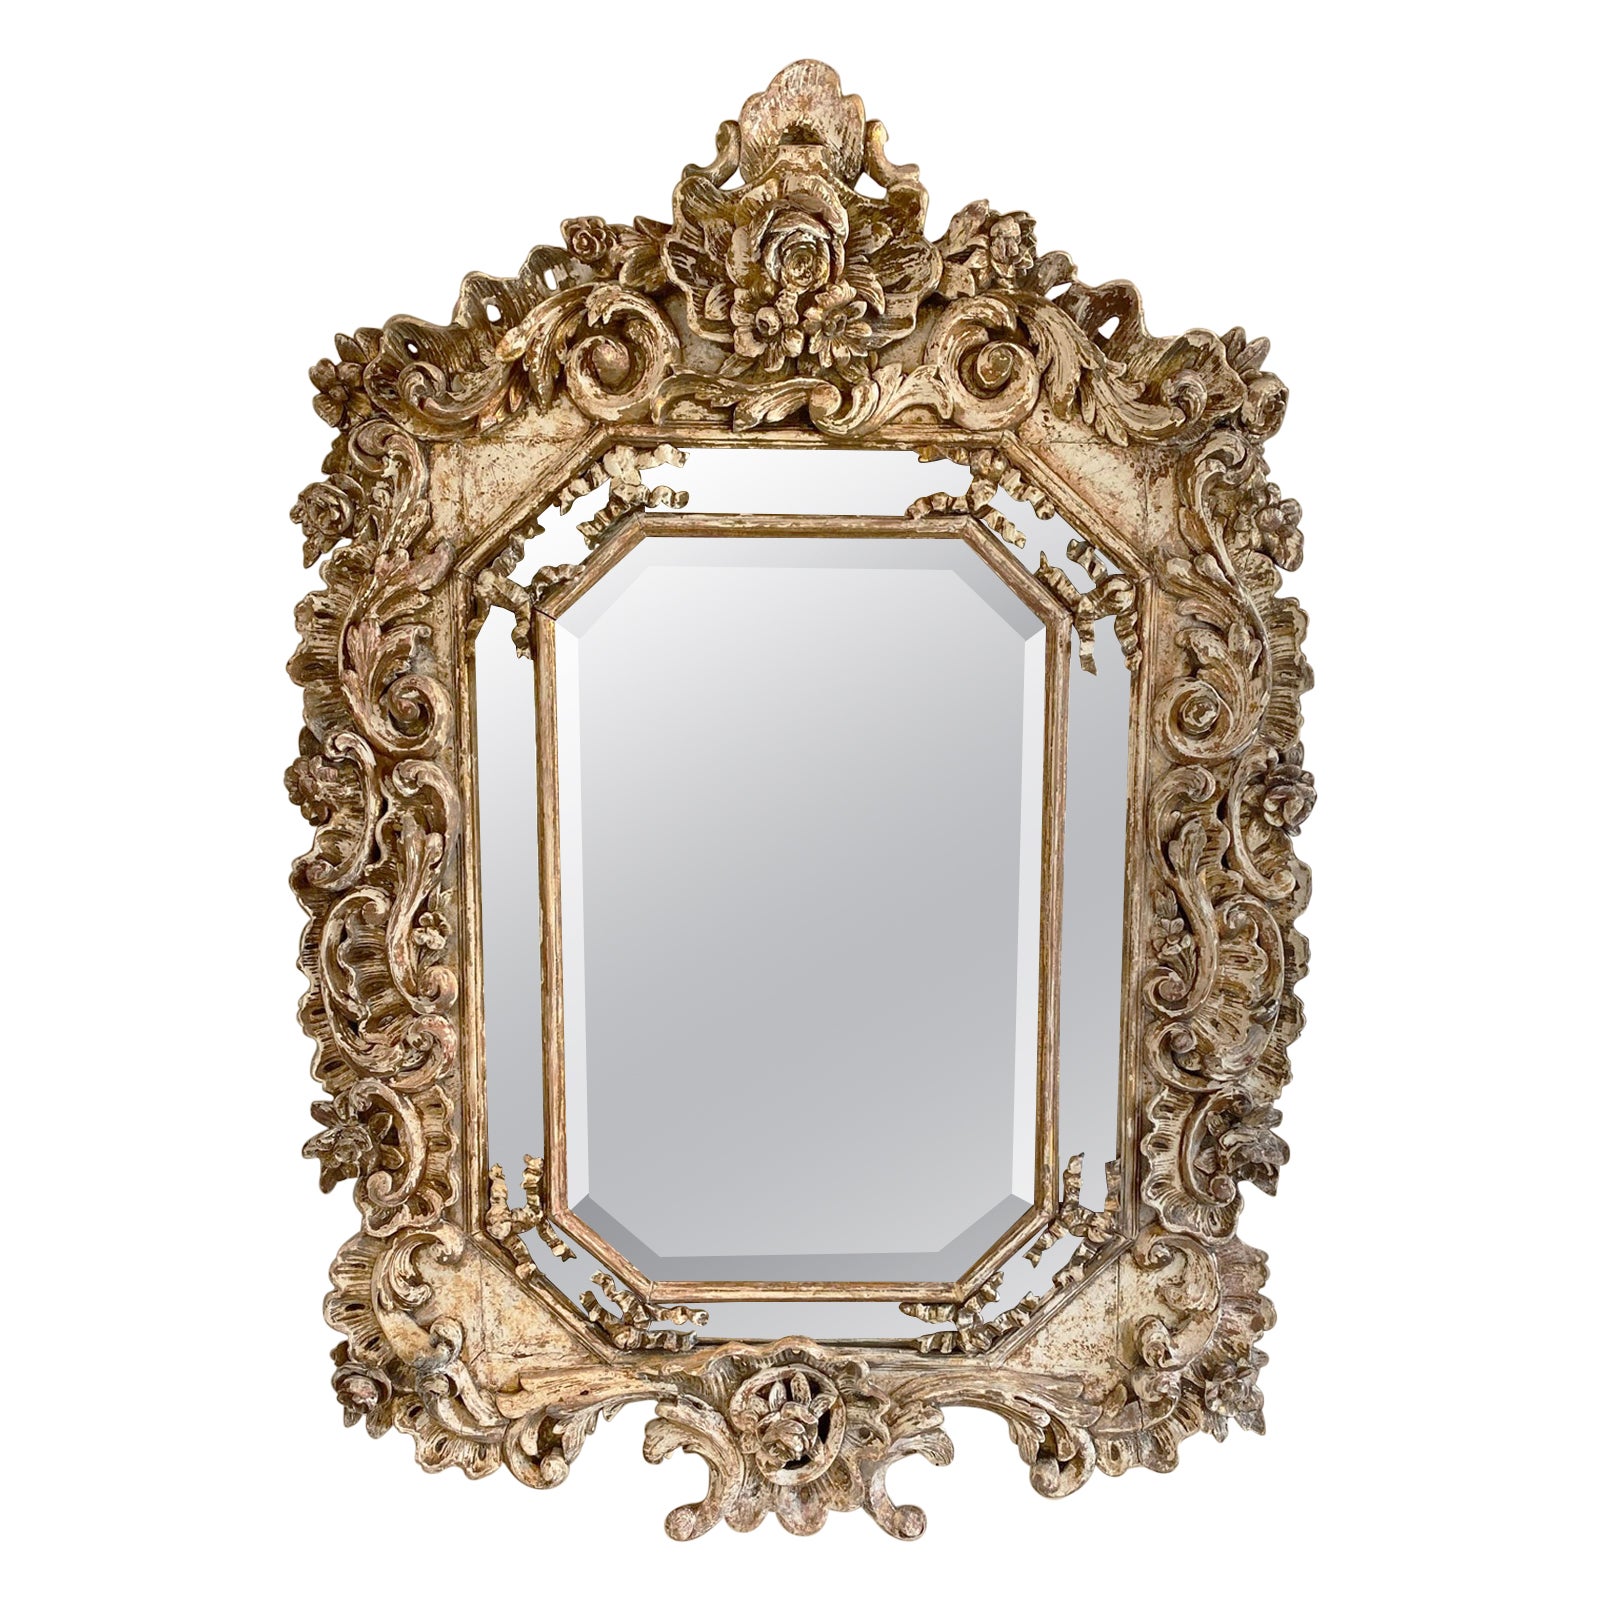 Elaborately Hand-Carved 18th Century Rococo Wall Mirror For Sale